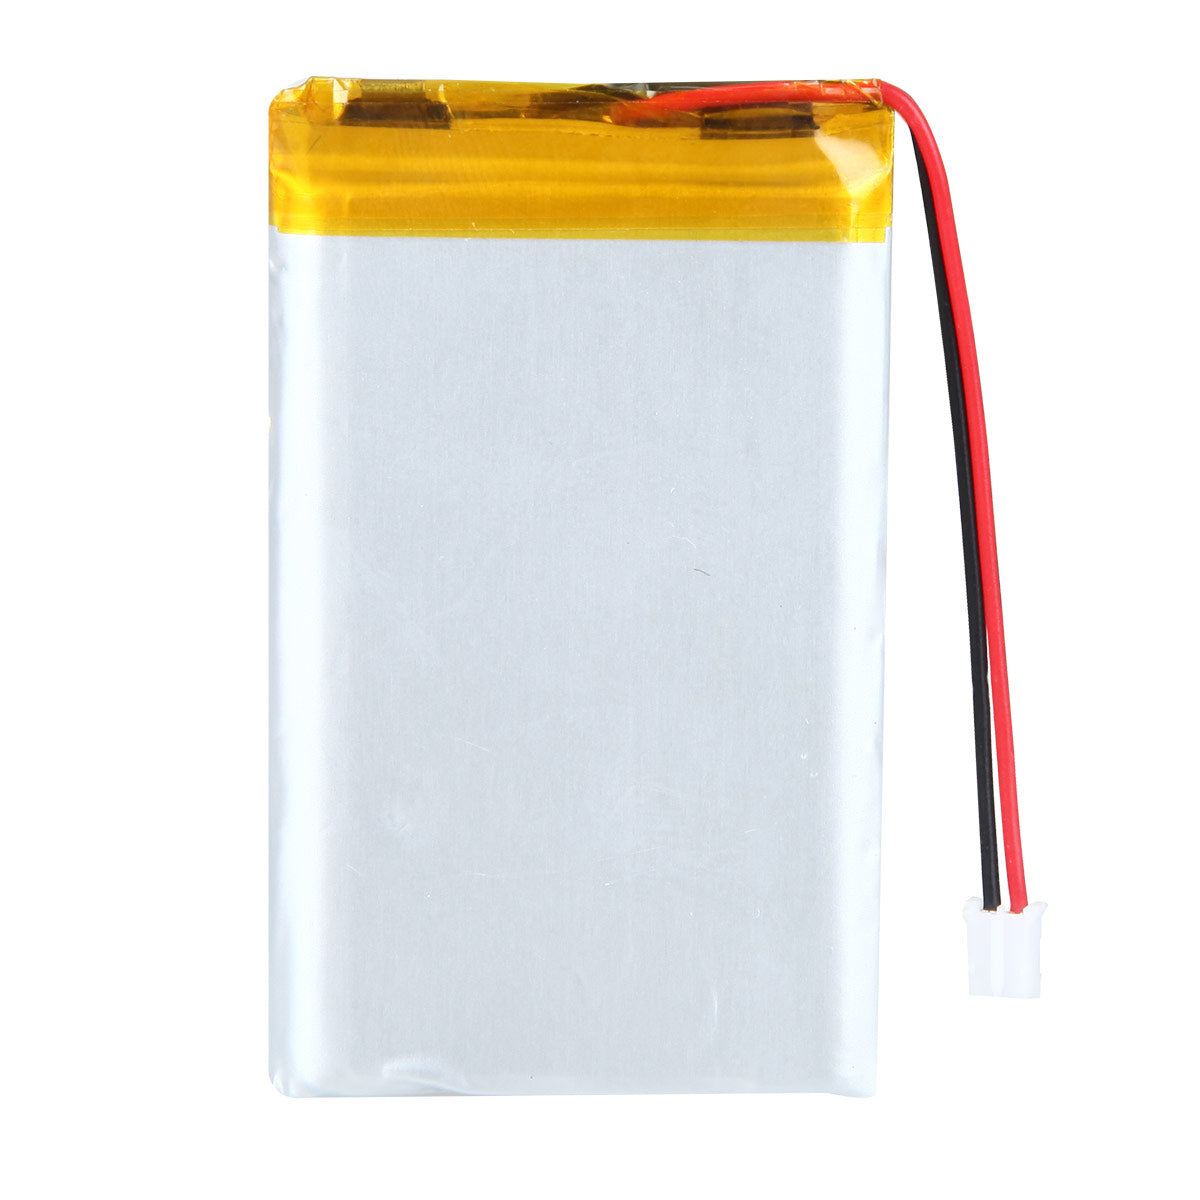 YDL 3.7V 2200mAh 604368 Rechargeable Lithium Polymer Battery